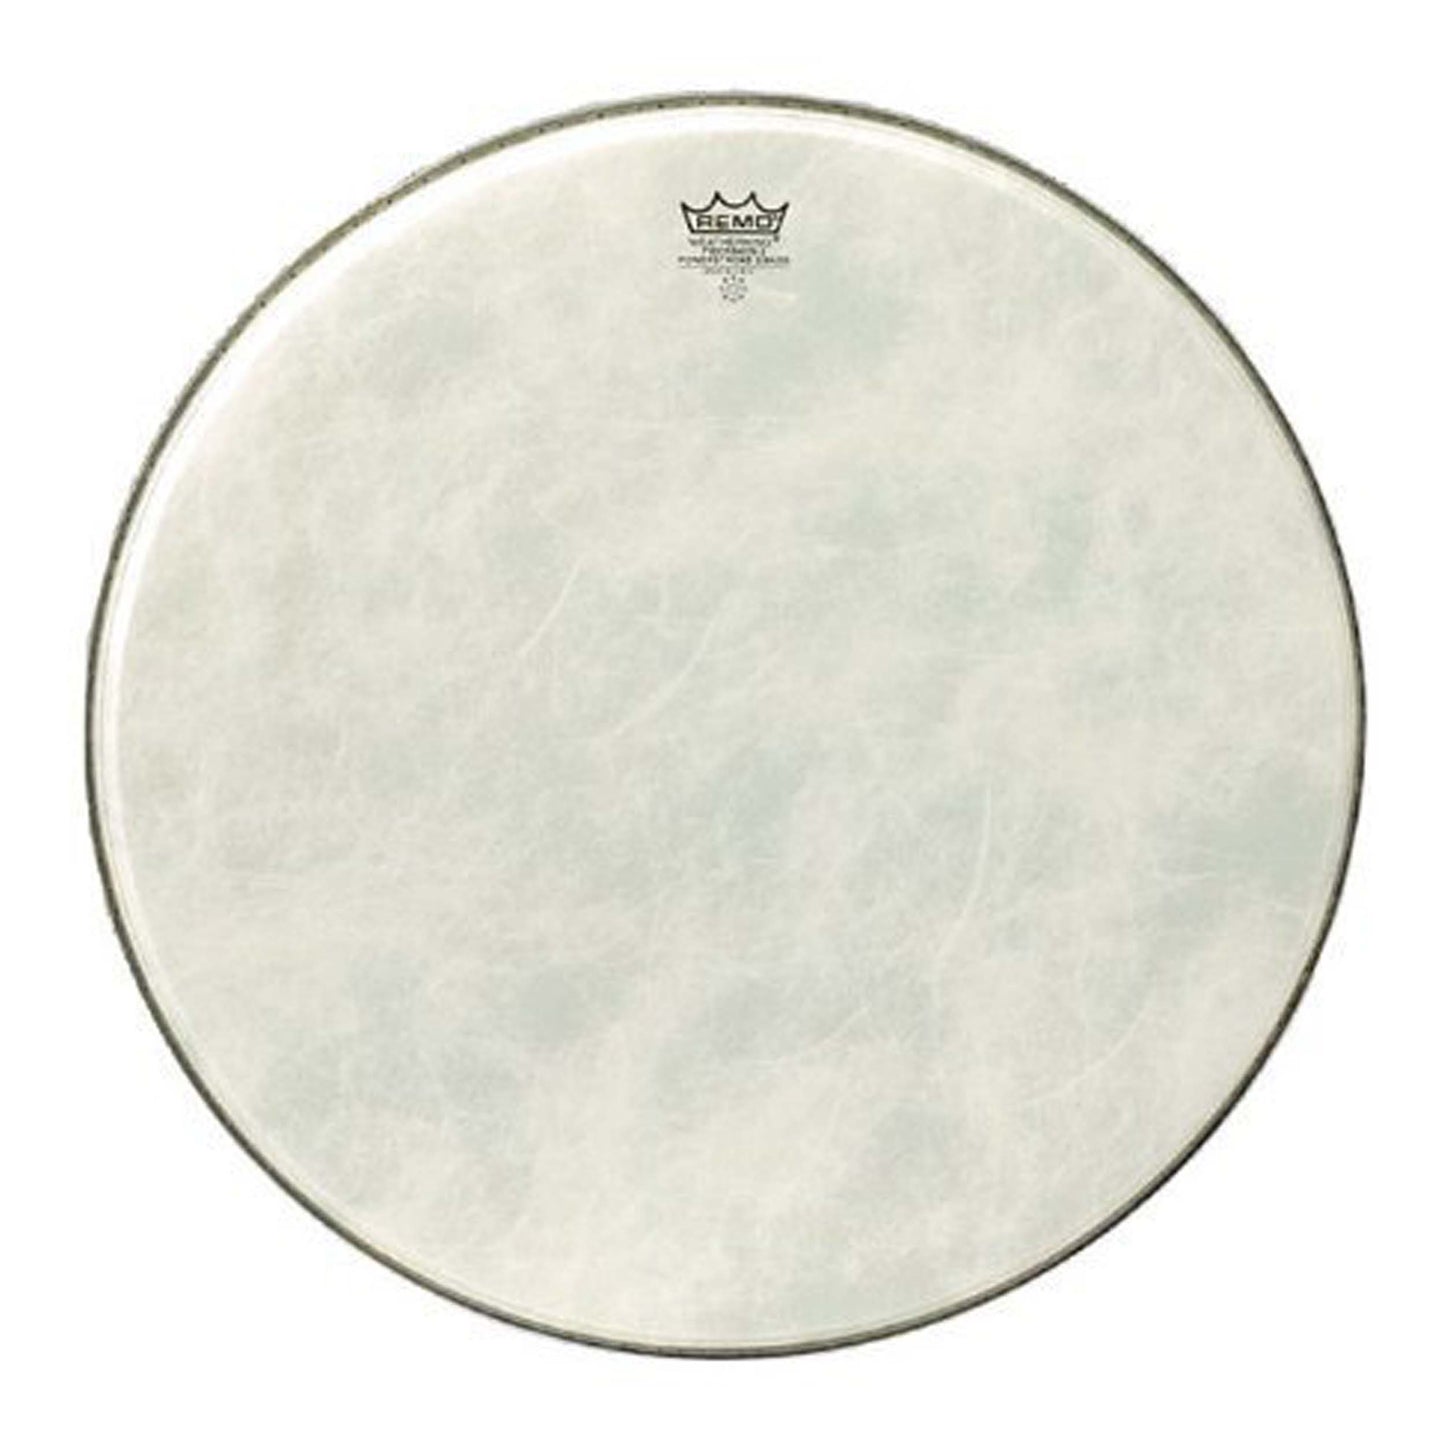 Remo Powerstroke 3 Simulated Calfskin Fiberskyn FA Bass Drumhead 20 Inches